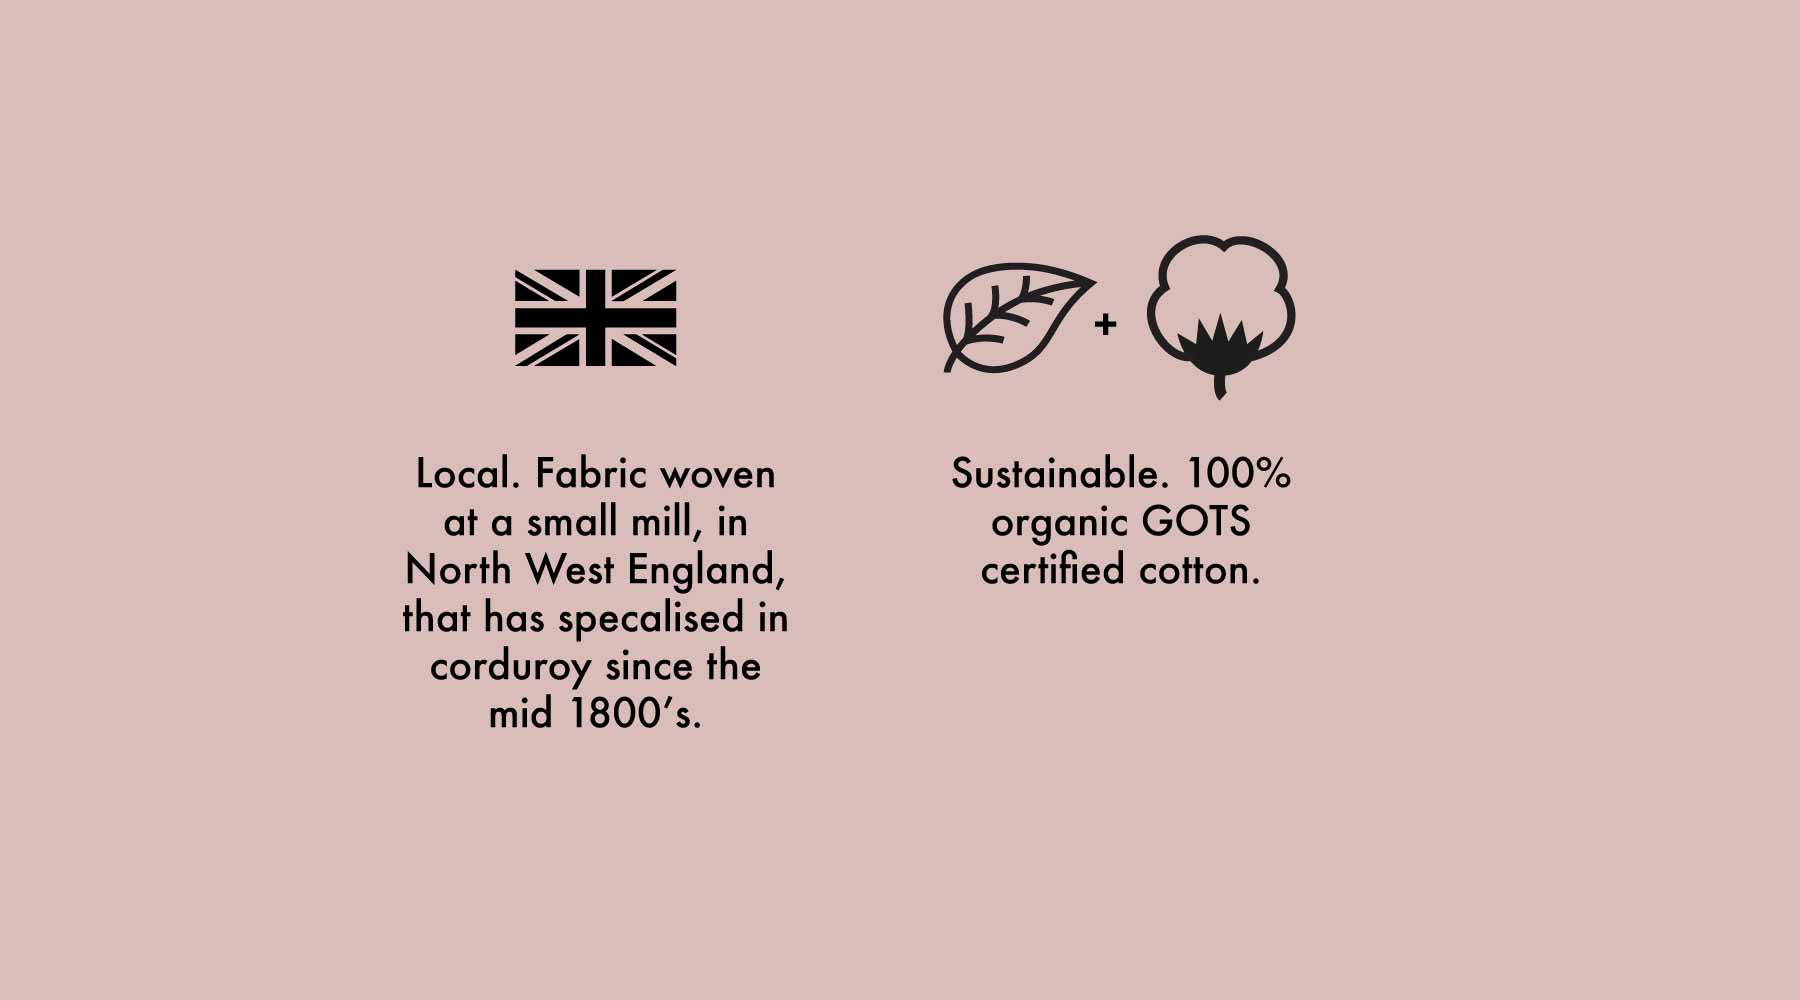 Symbols identifying the Organic Corduroy fabric having been made by a British Company that has made corduroy since the mid 1800s and is 100% GOTS certified organic cotton